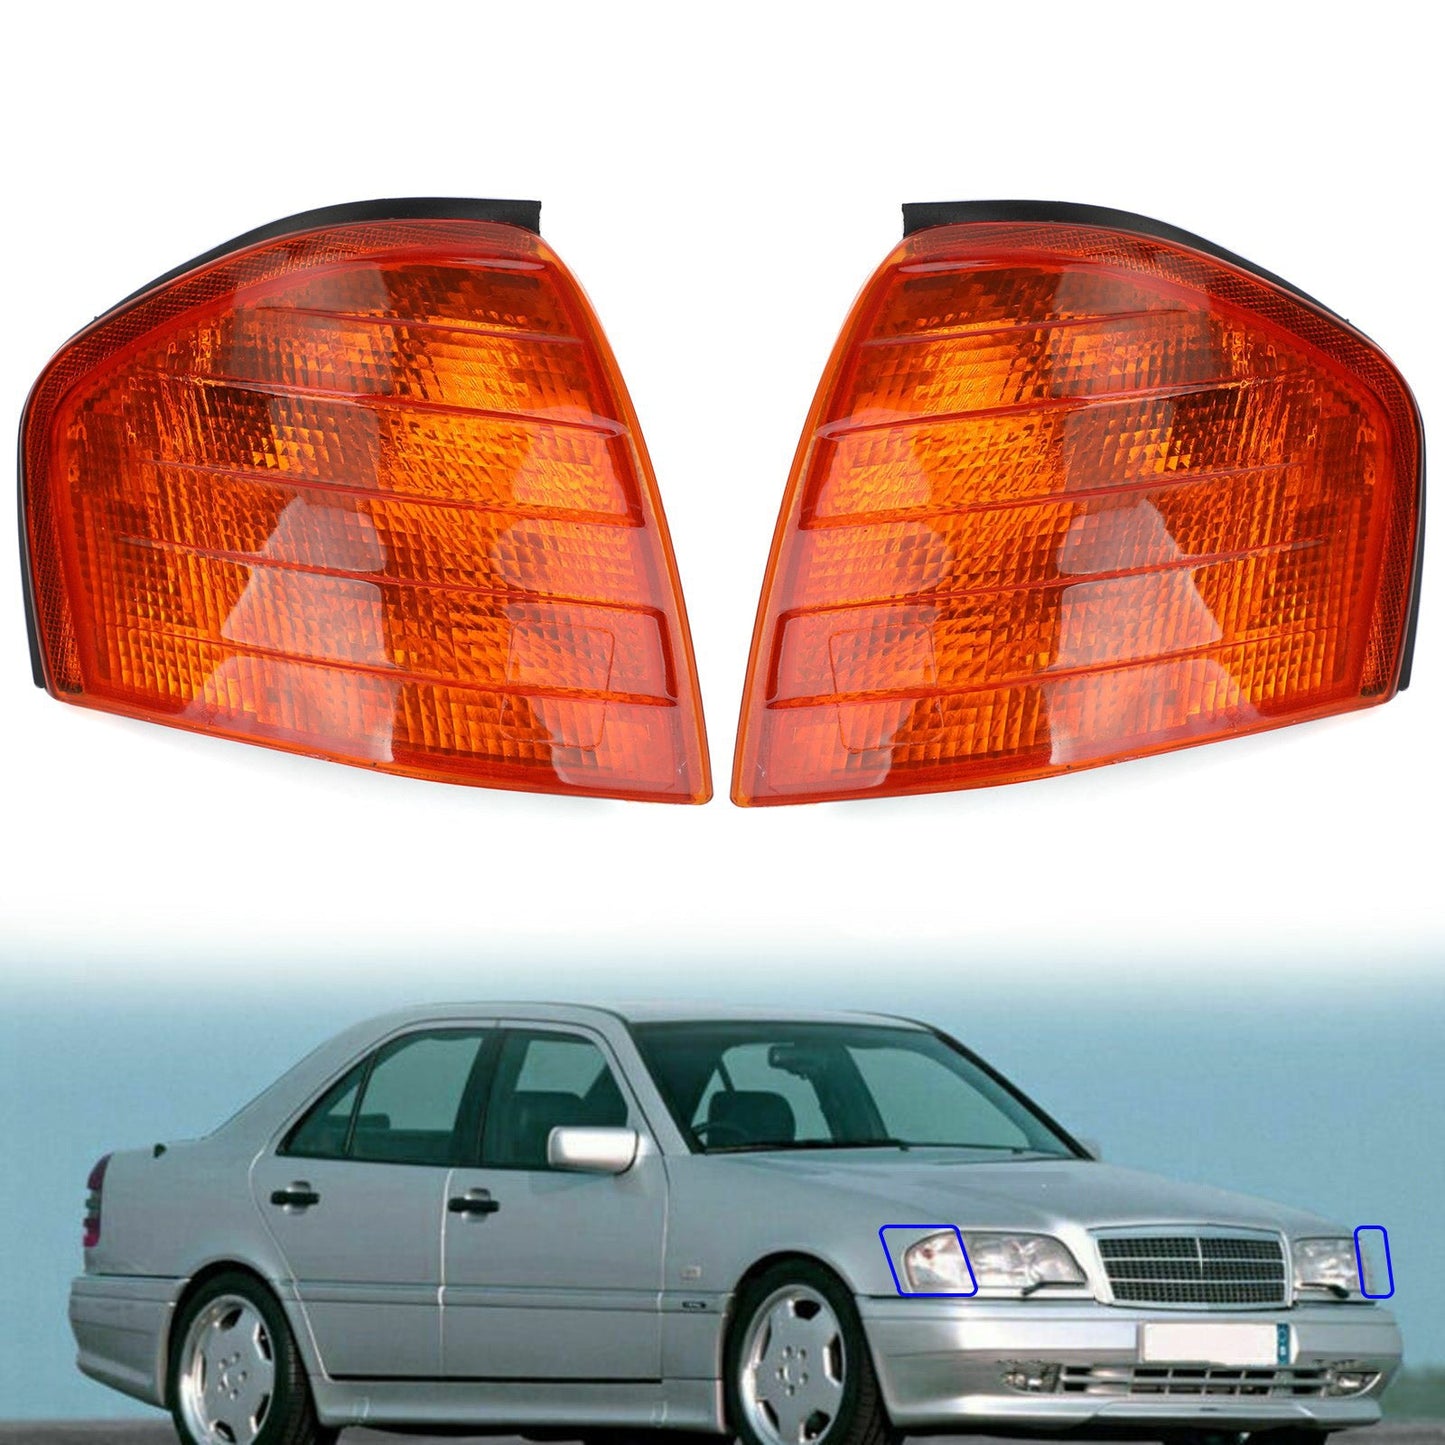 Left Corner Lights Turn Signal Lamps Fit For Mercedes Benz C Class W202 1994-2000